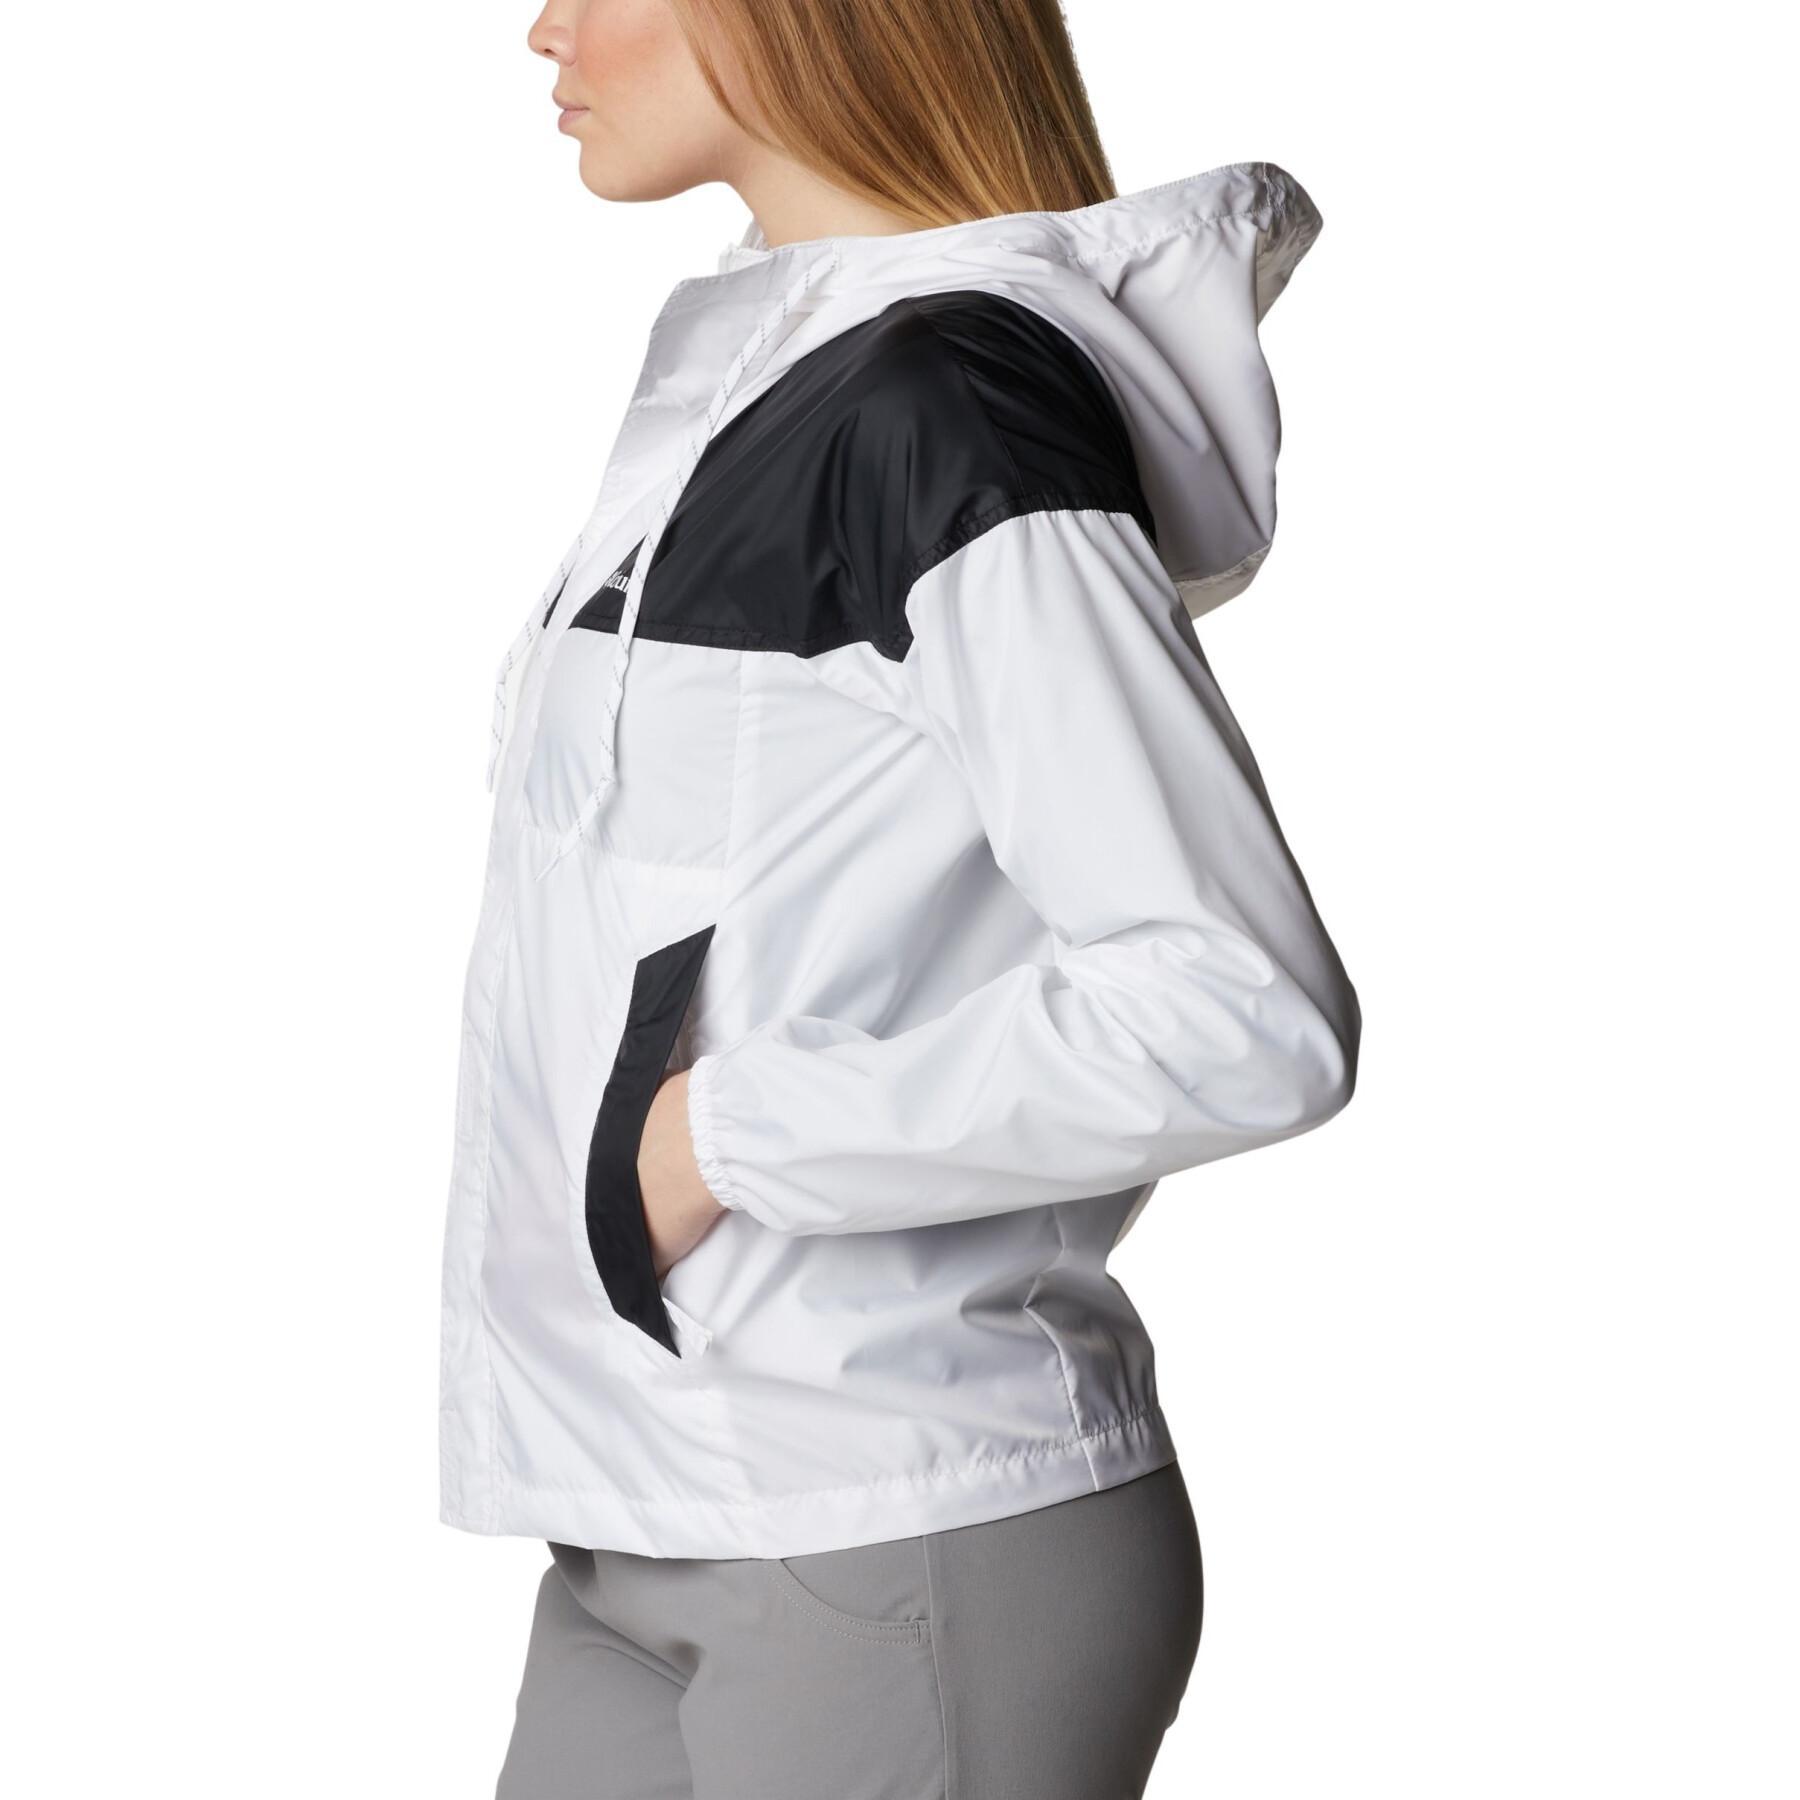 Chaqueta impermeable mujer Columbia Flash Challenger Windbreaker